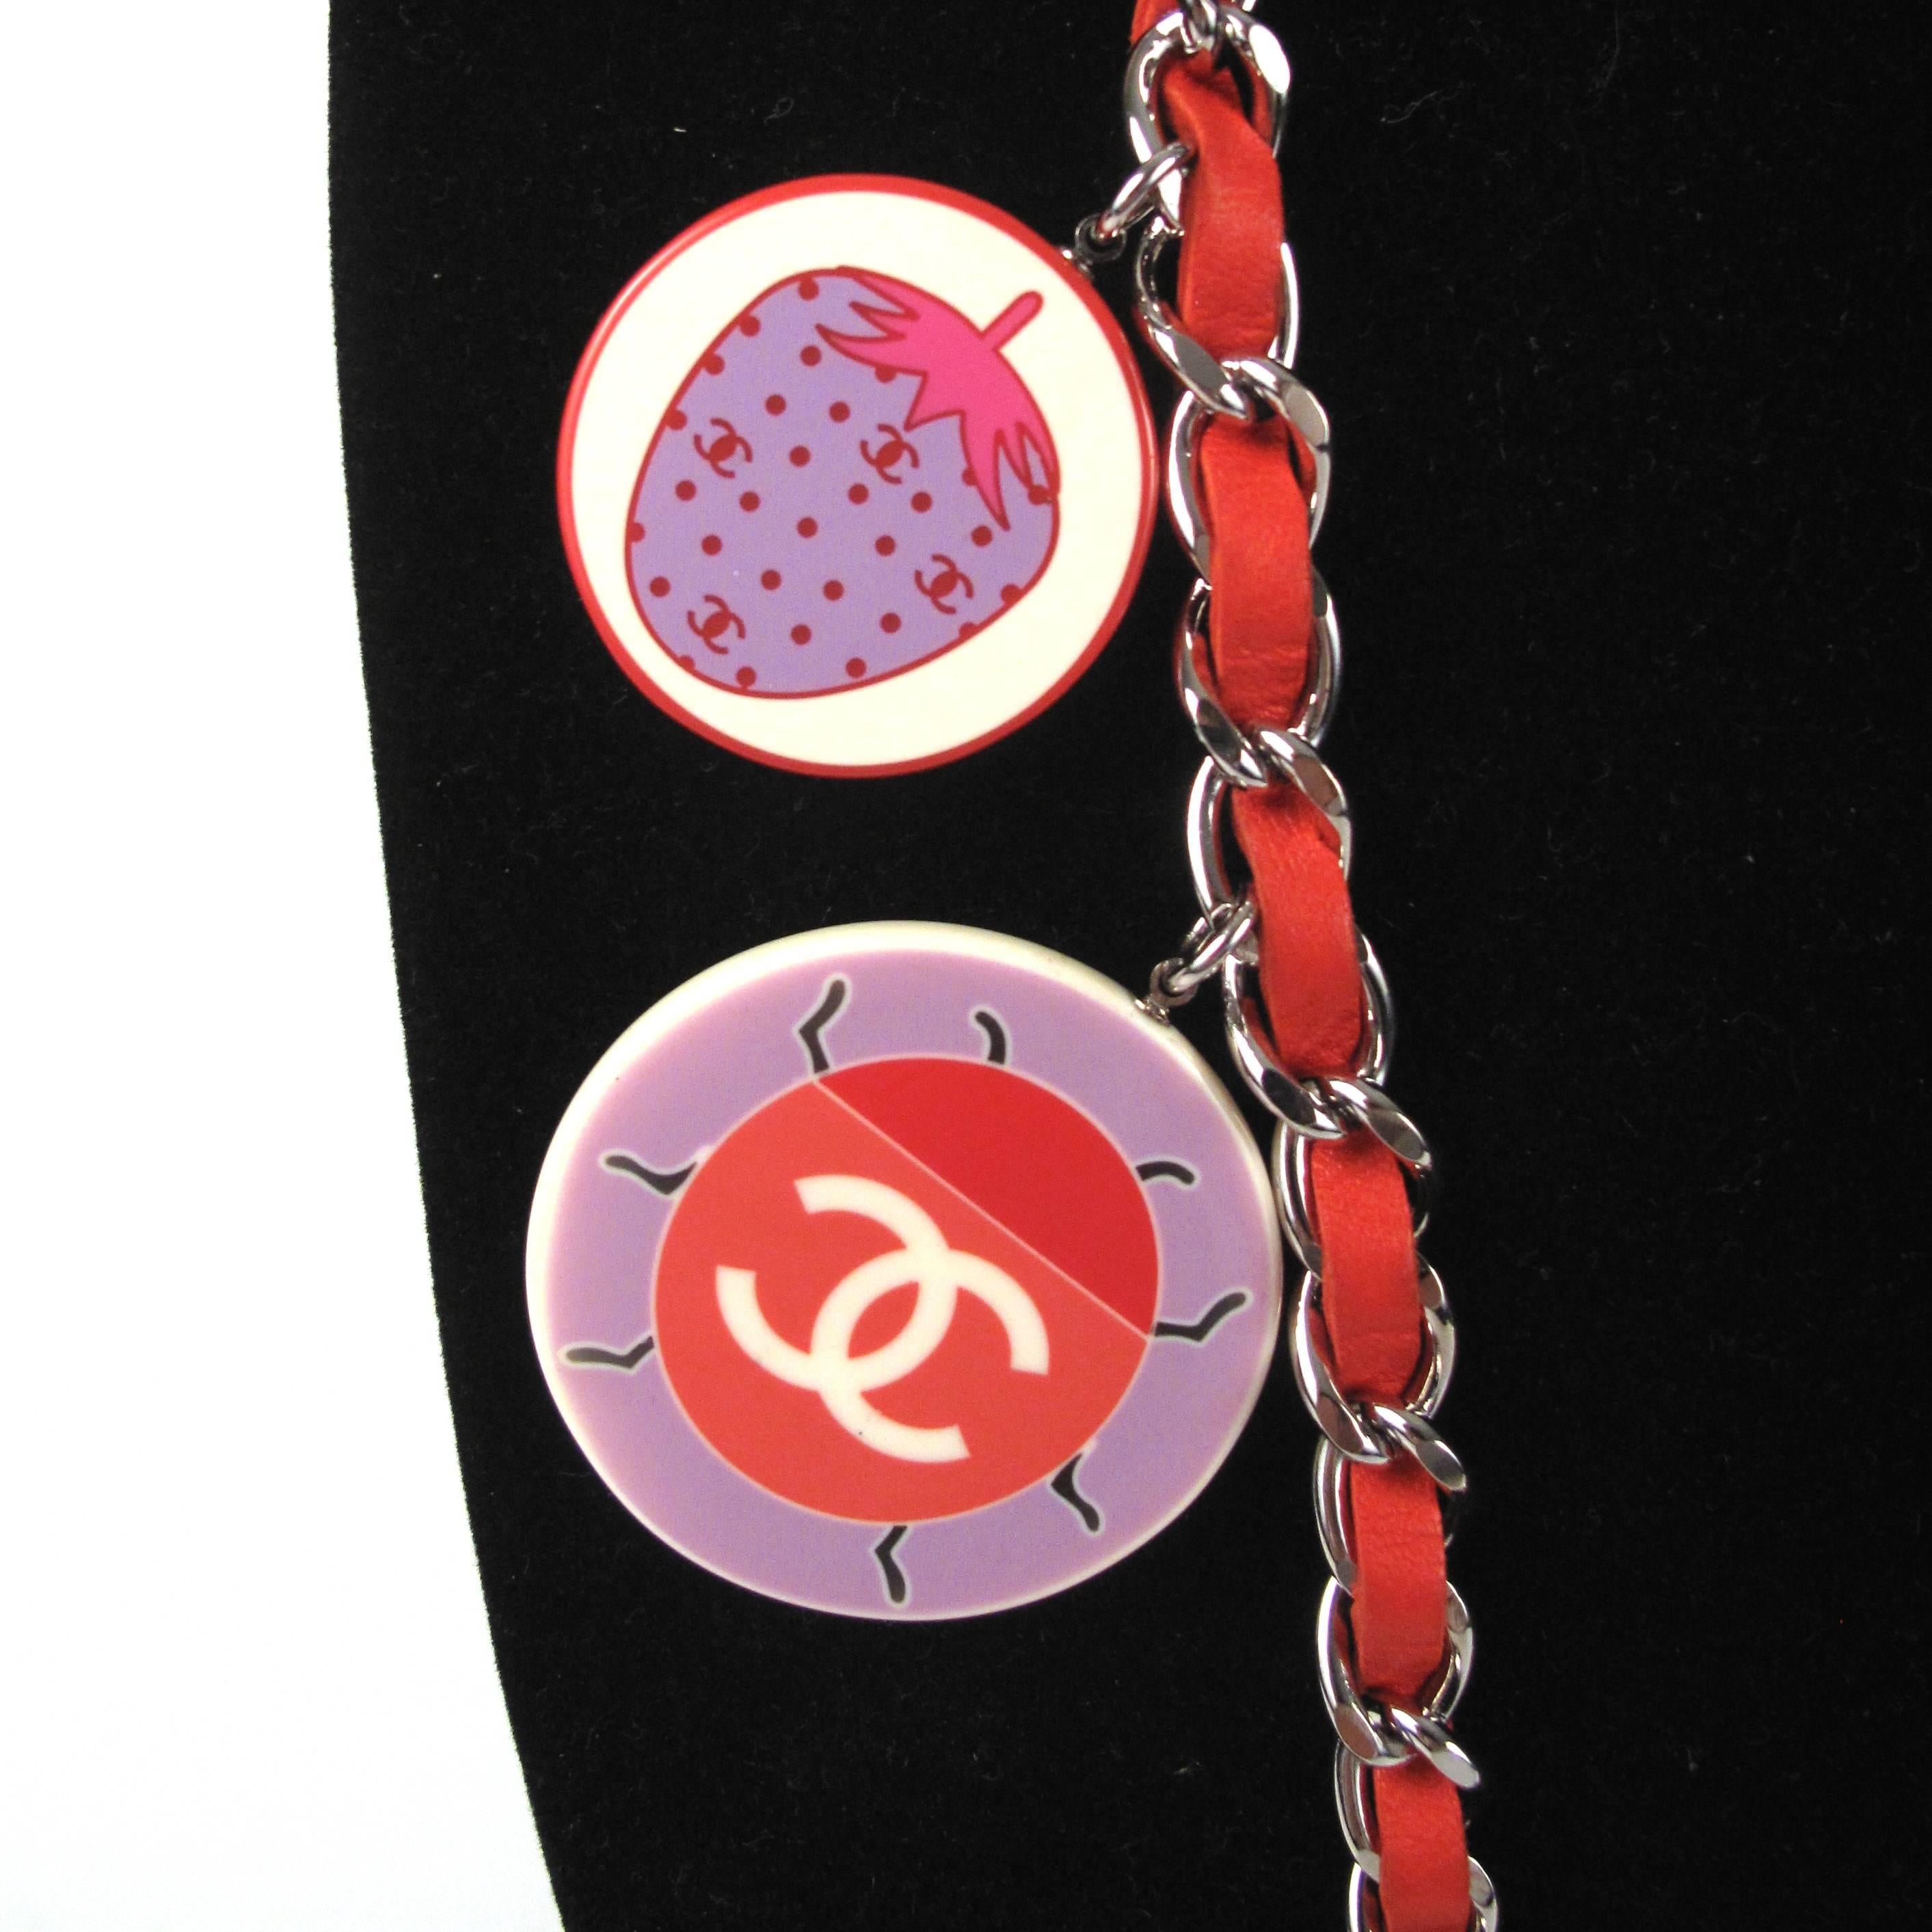 Chanel Ladybug Necklace - New - CC Logo Charms Red Leather Chain Silver Belt 04C In Excellent Condition For Sale In Prahran, Victoria